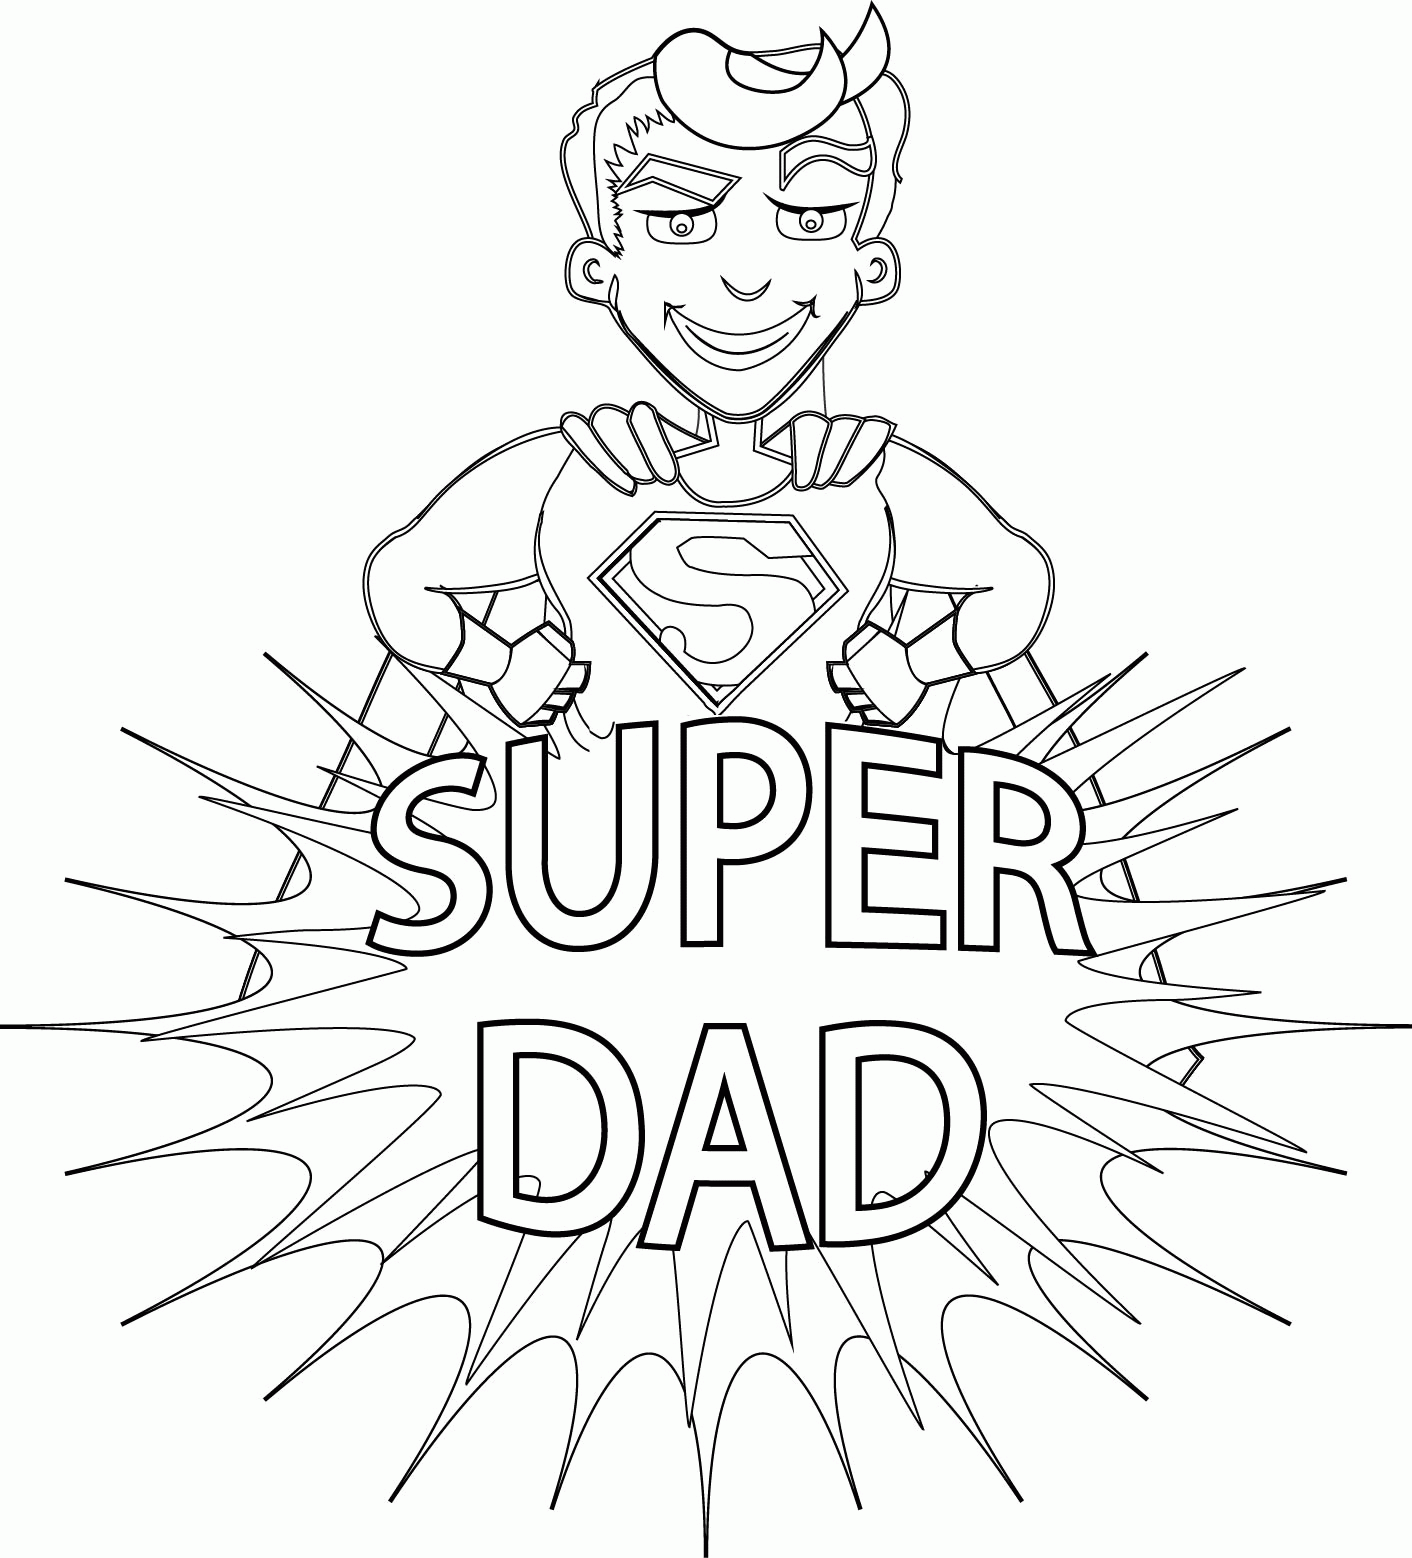 Super Dad Coloring Pages - High Quality Coloring Pages